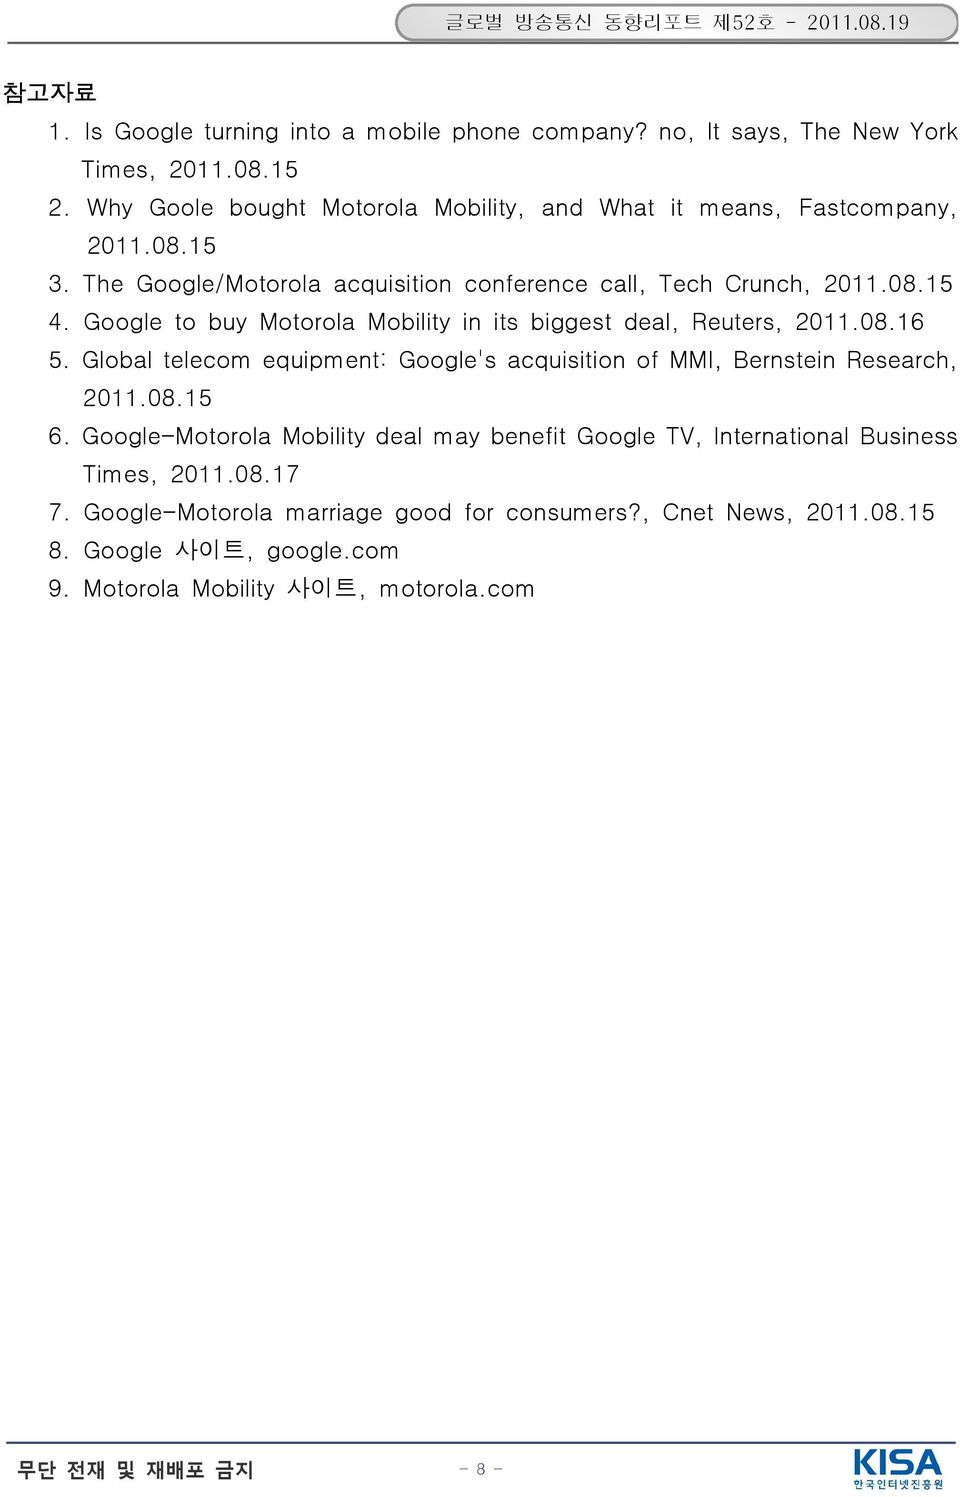 Google to buy Motorola Mobility in its biggest deal, Reuters, 2011.08.16 5. Global telecom equipment: Google's acquisition of MMI, Bernstein Research, 2011.08.15 6.